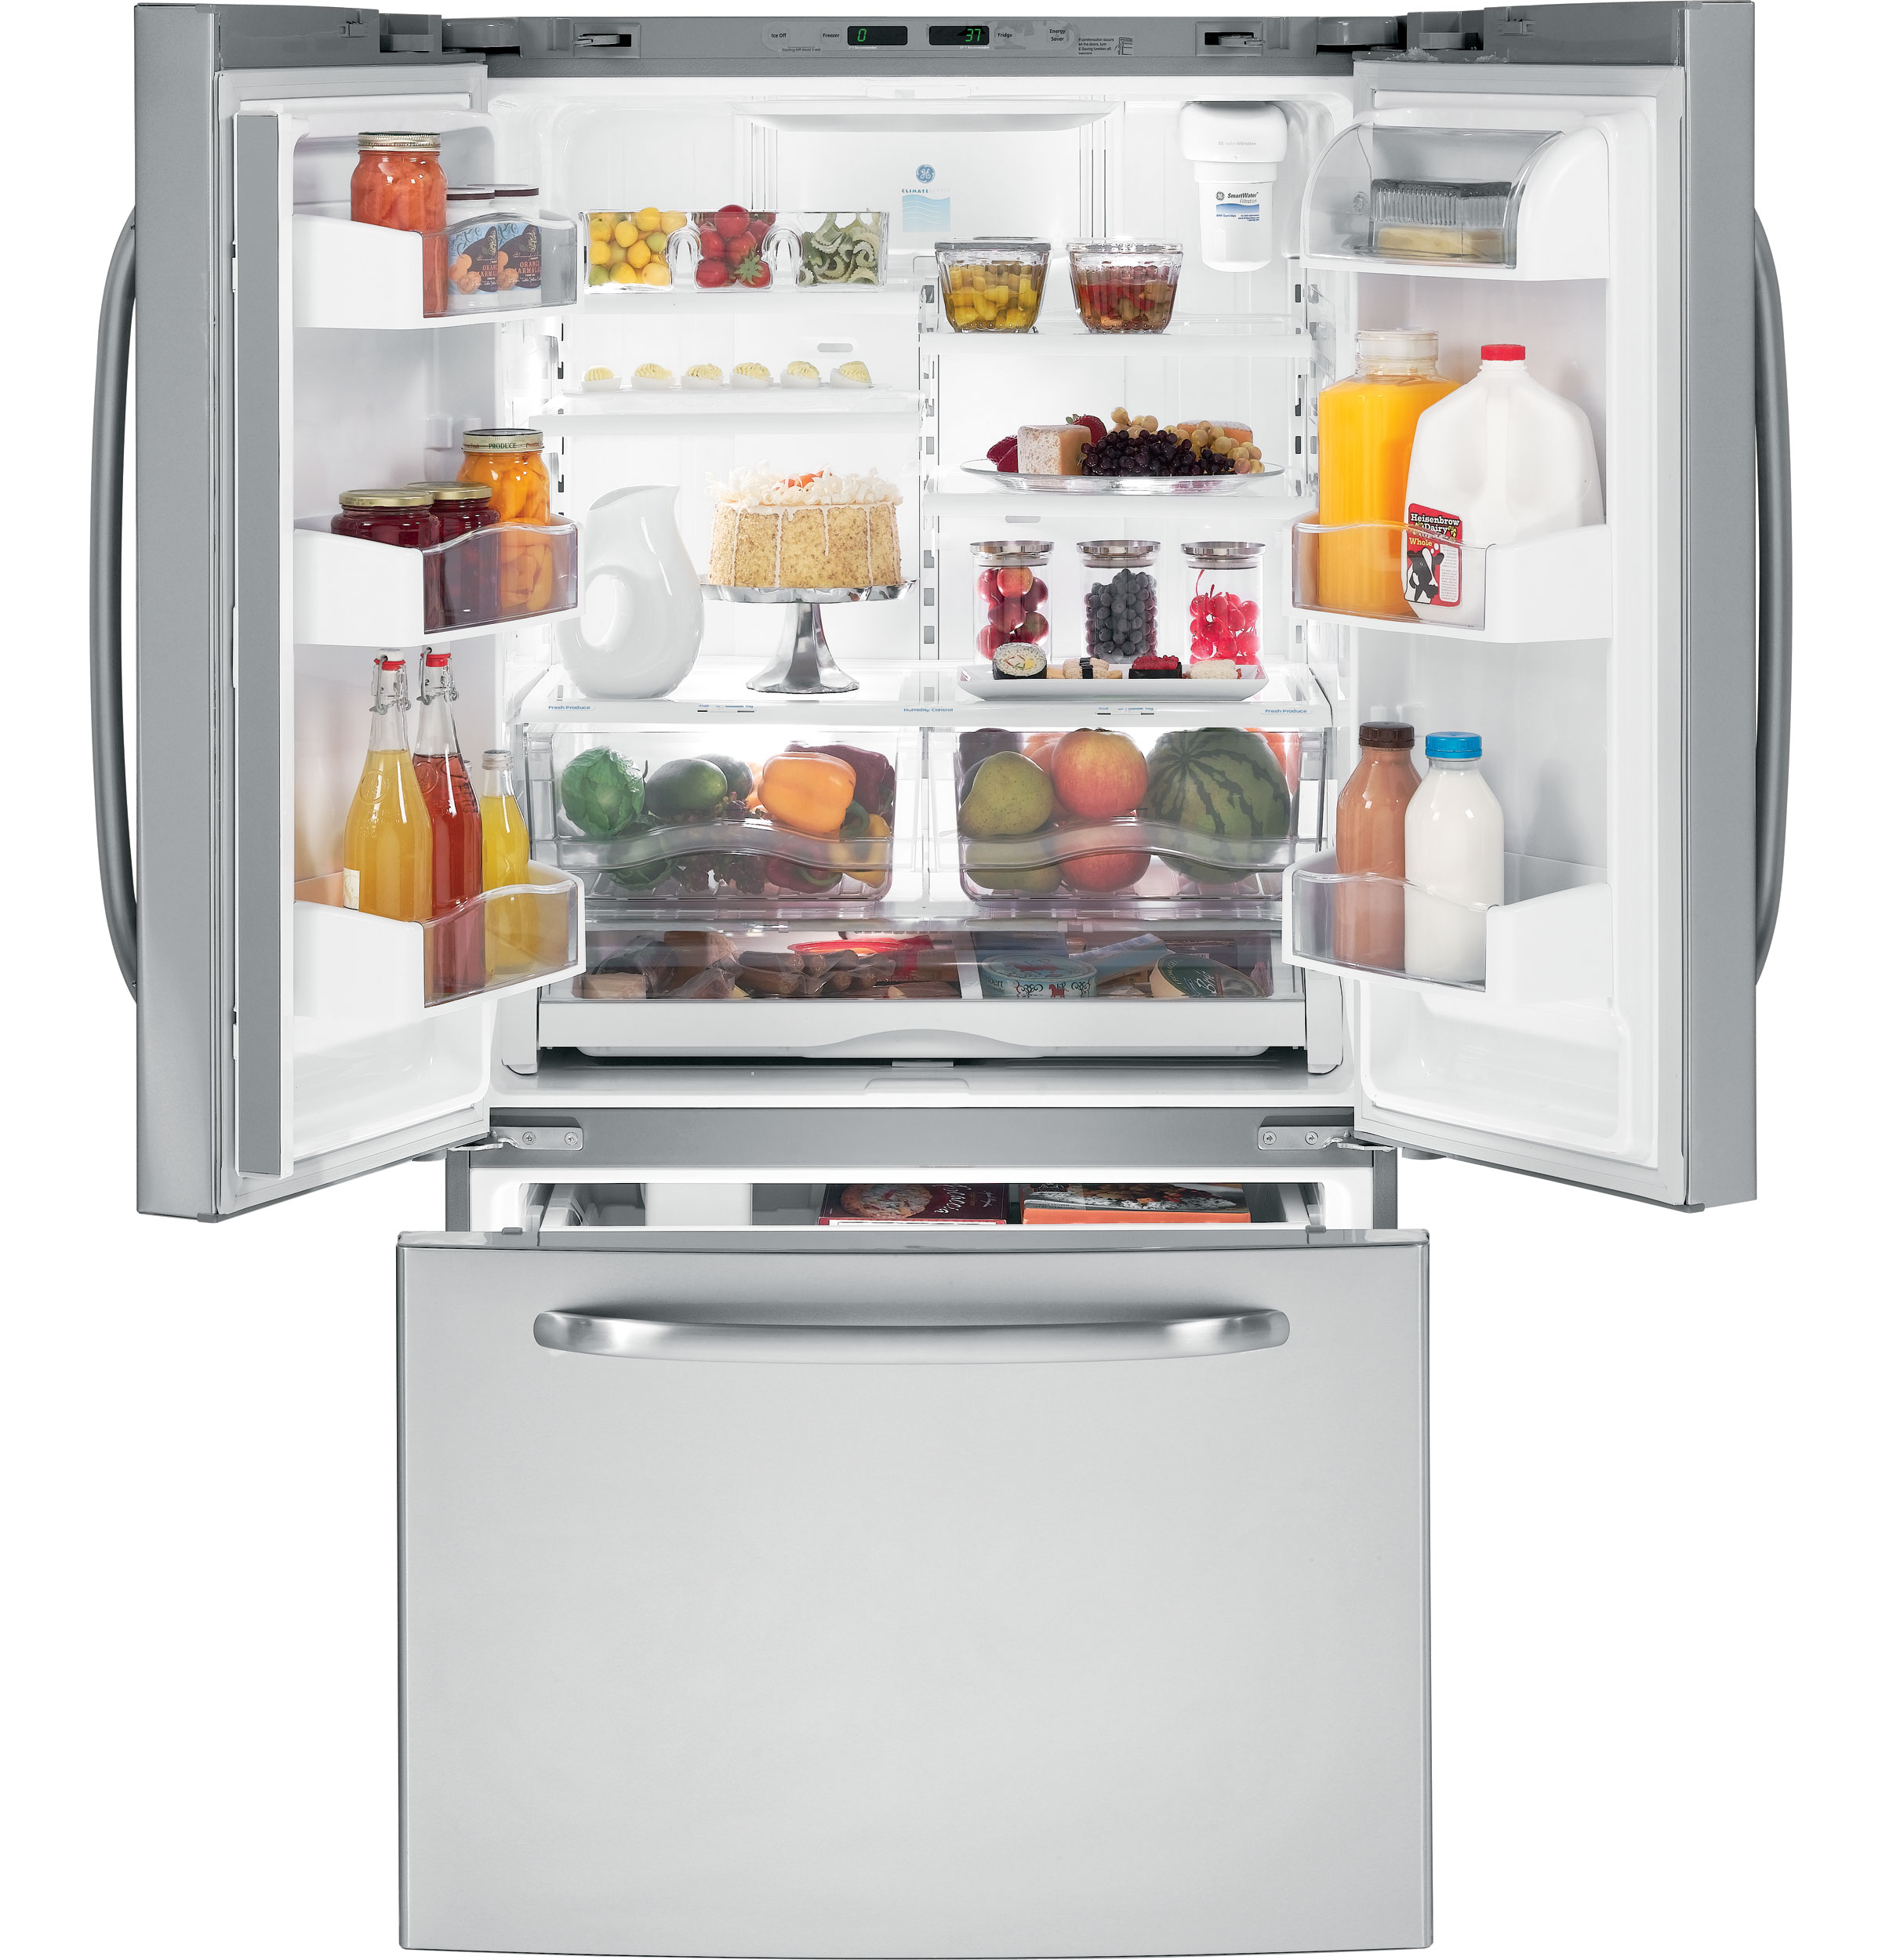 GE® ENERGY STAR® 25.8 Cu. Ft. French-Door Refrigerator with Icemaker